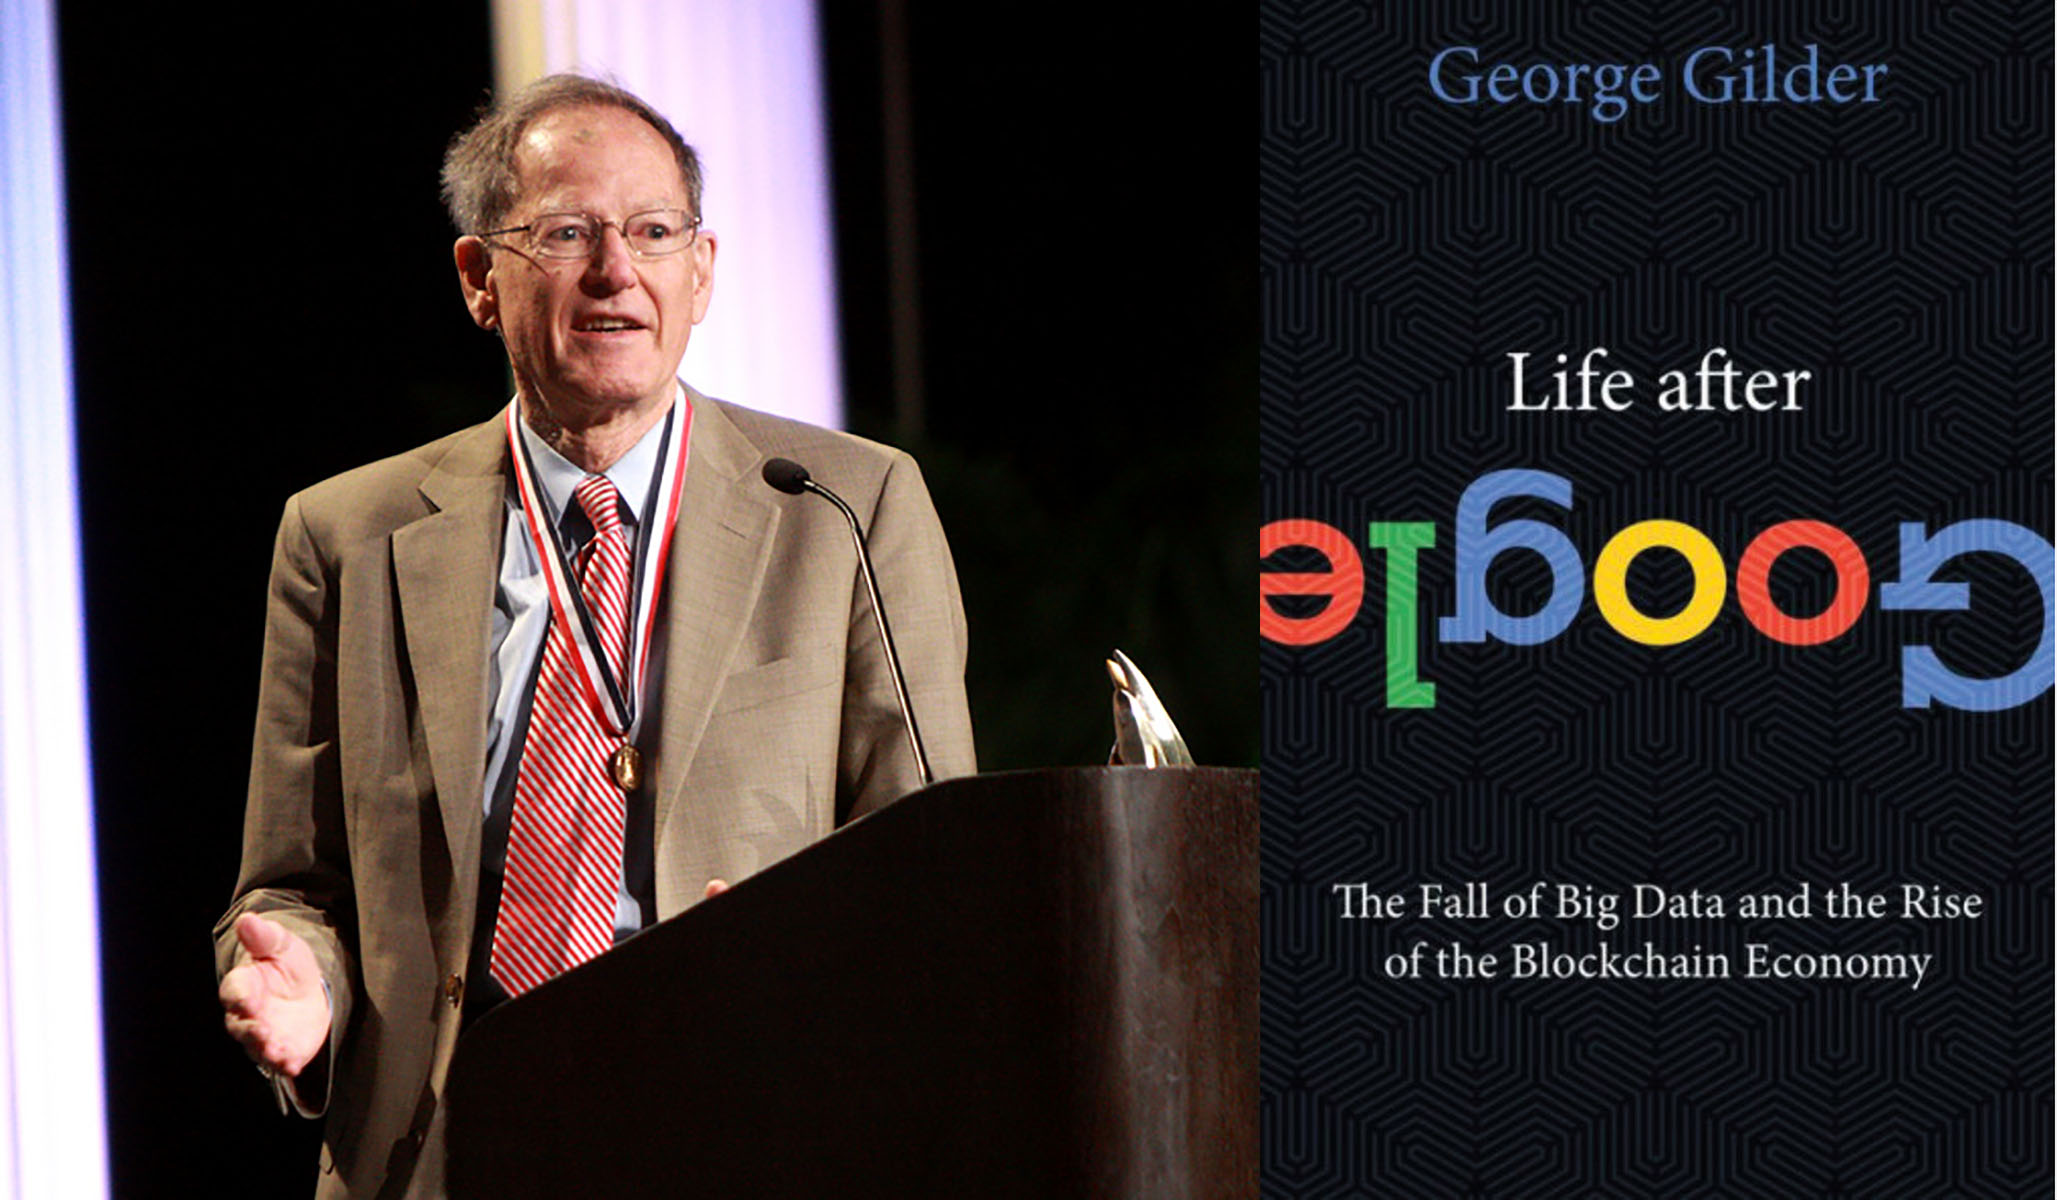 The Fall of Big Data and the Rise of the Blockchain Economy by George Gilder 2018, Hardcover Life after Google for sale online 